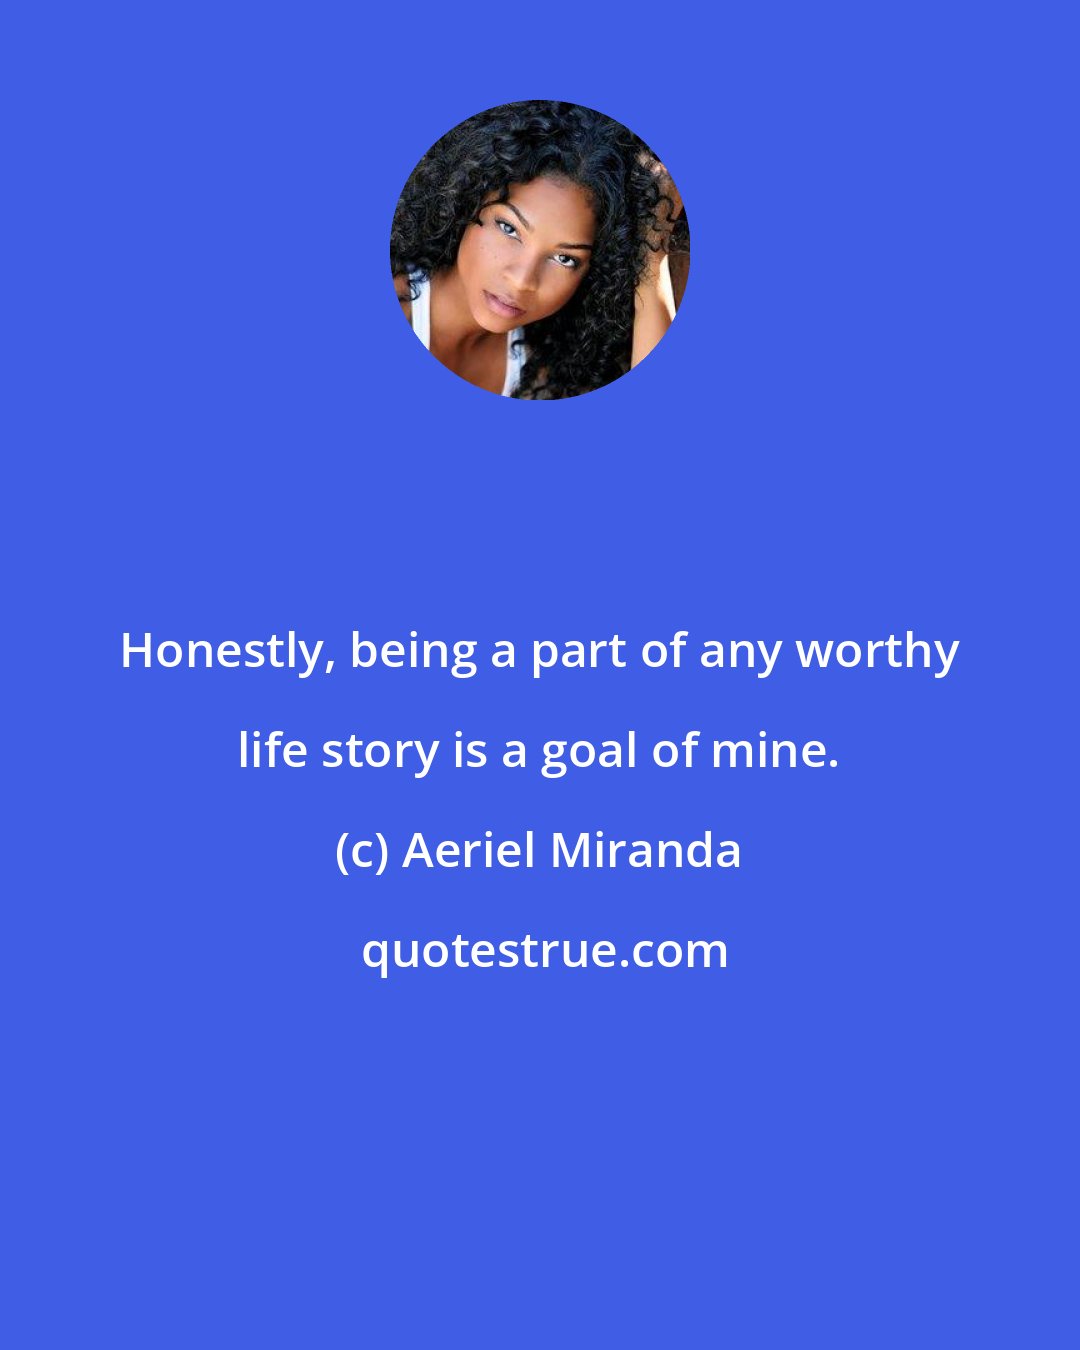 Aeriel Miranda: Honestly, being a part of any worthy life story is a goal of mine.